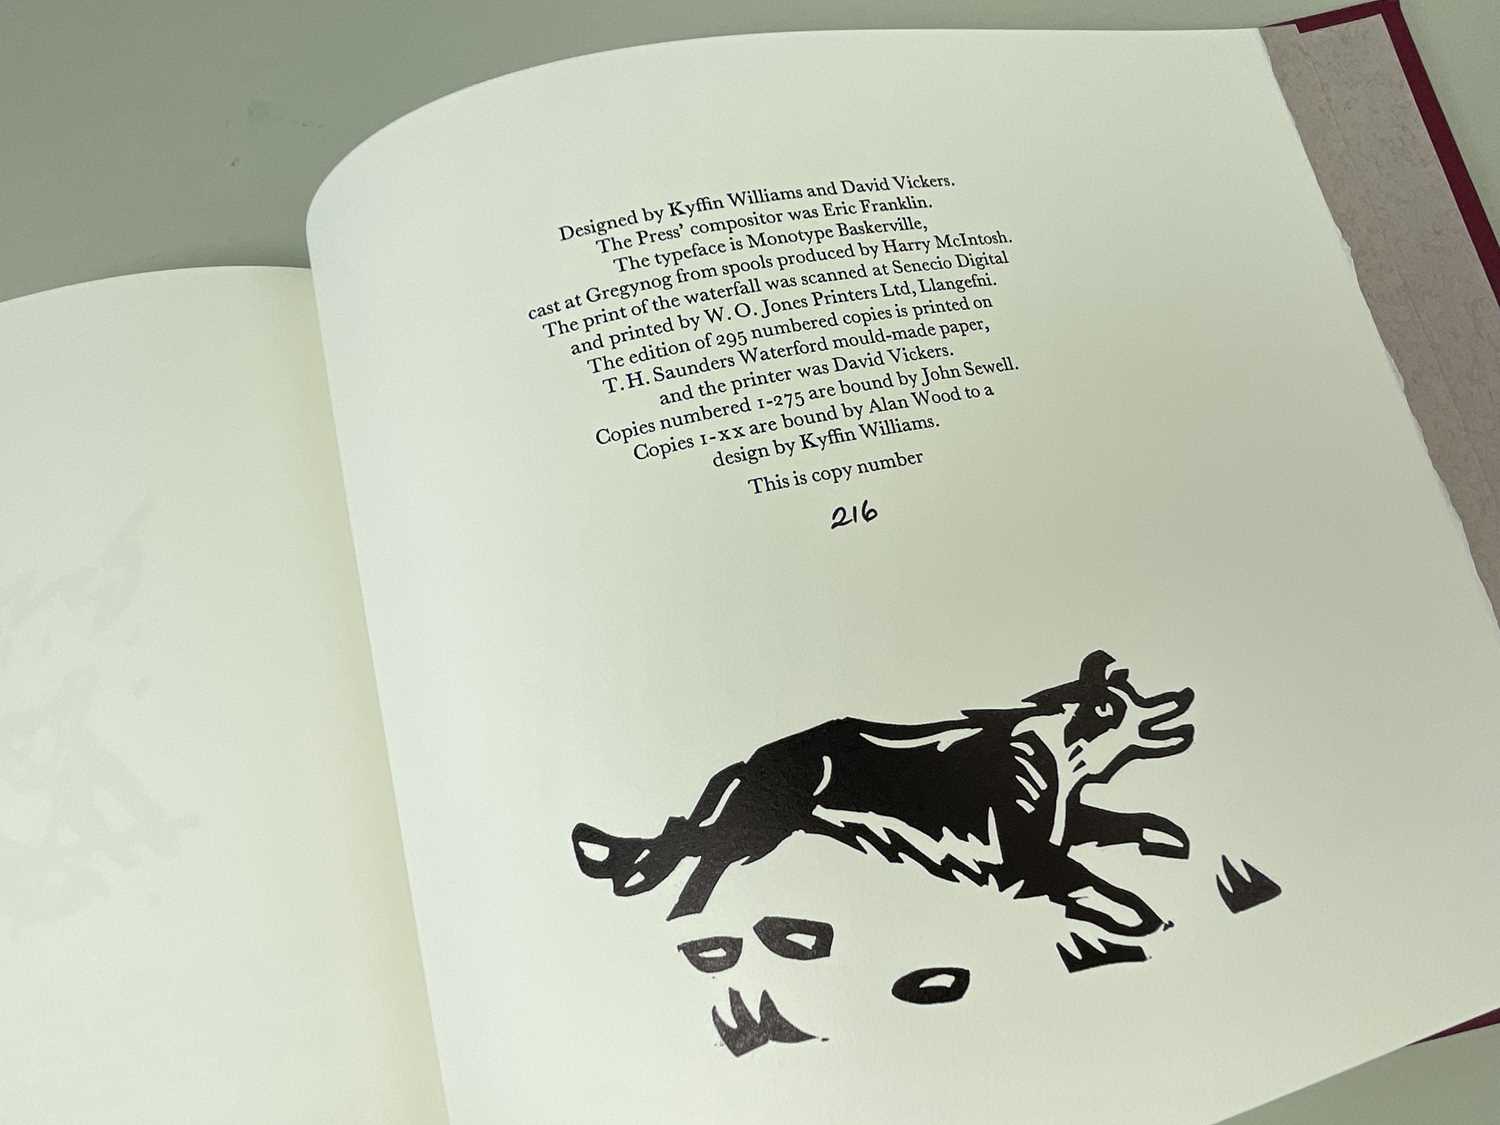 ‡ SIR KYFFIN WILLIAMS RA limited edition (216/275) volume of 'Cutting Images' - printed on T H - Image 8 of 10